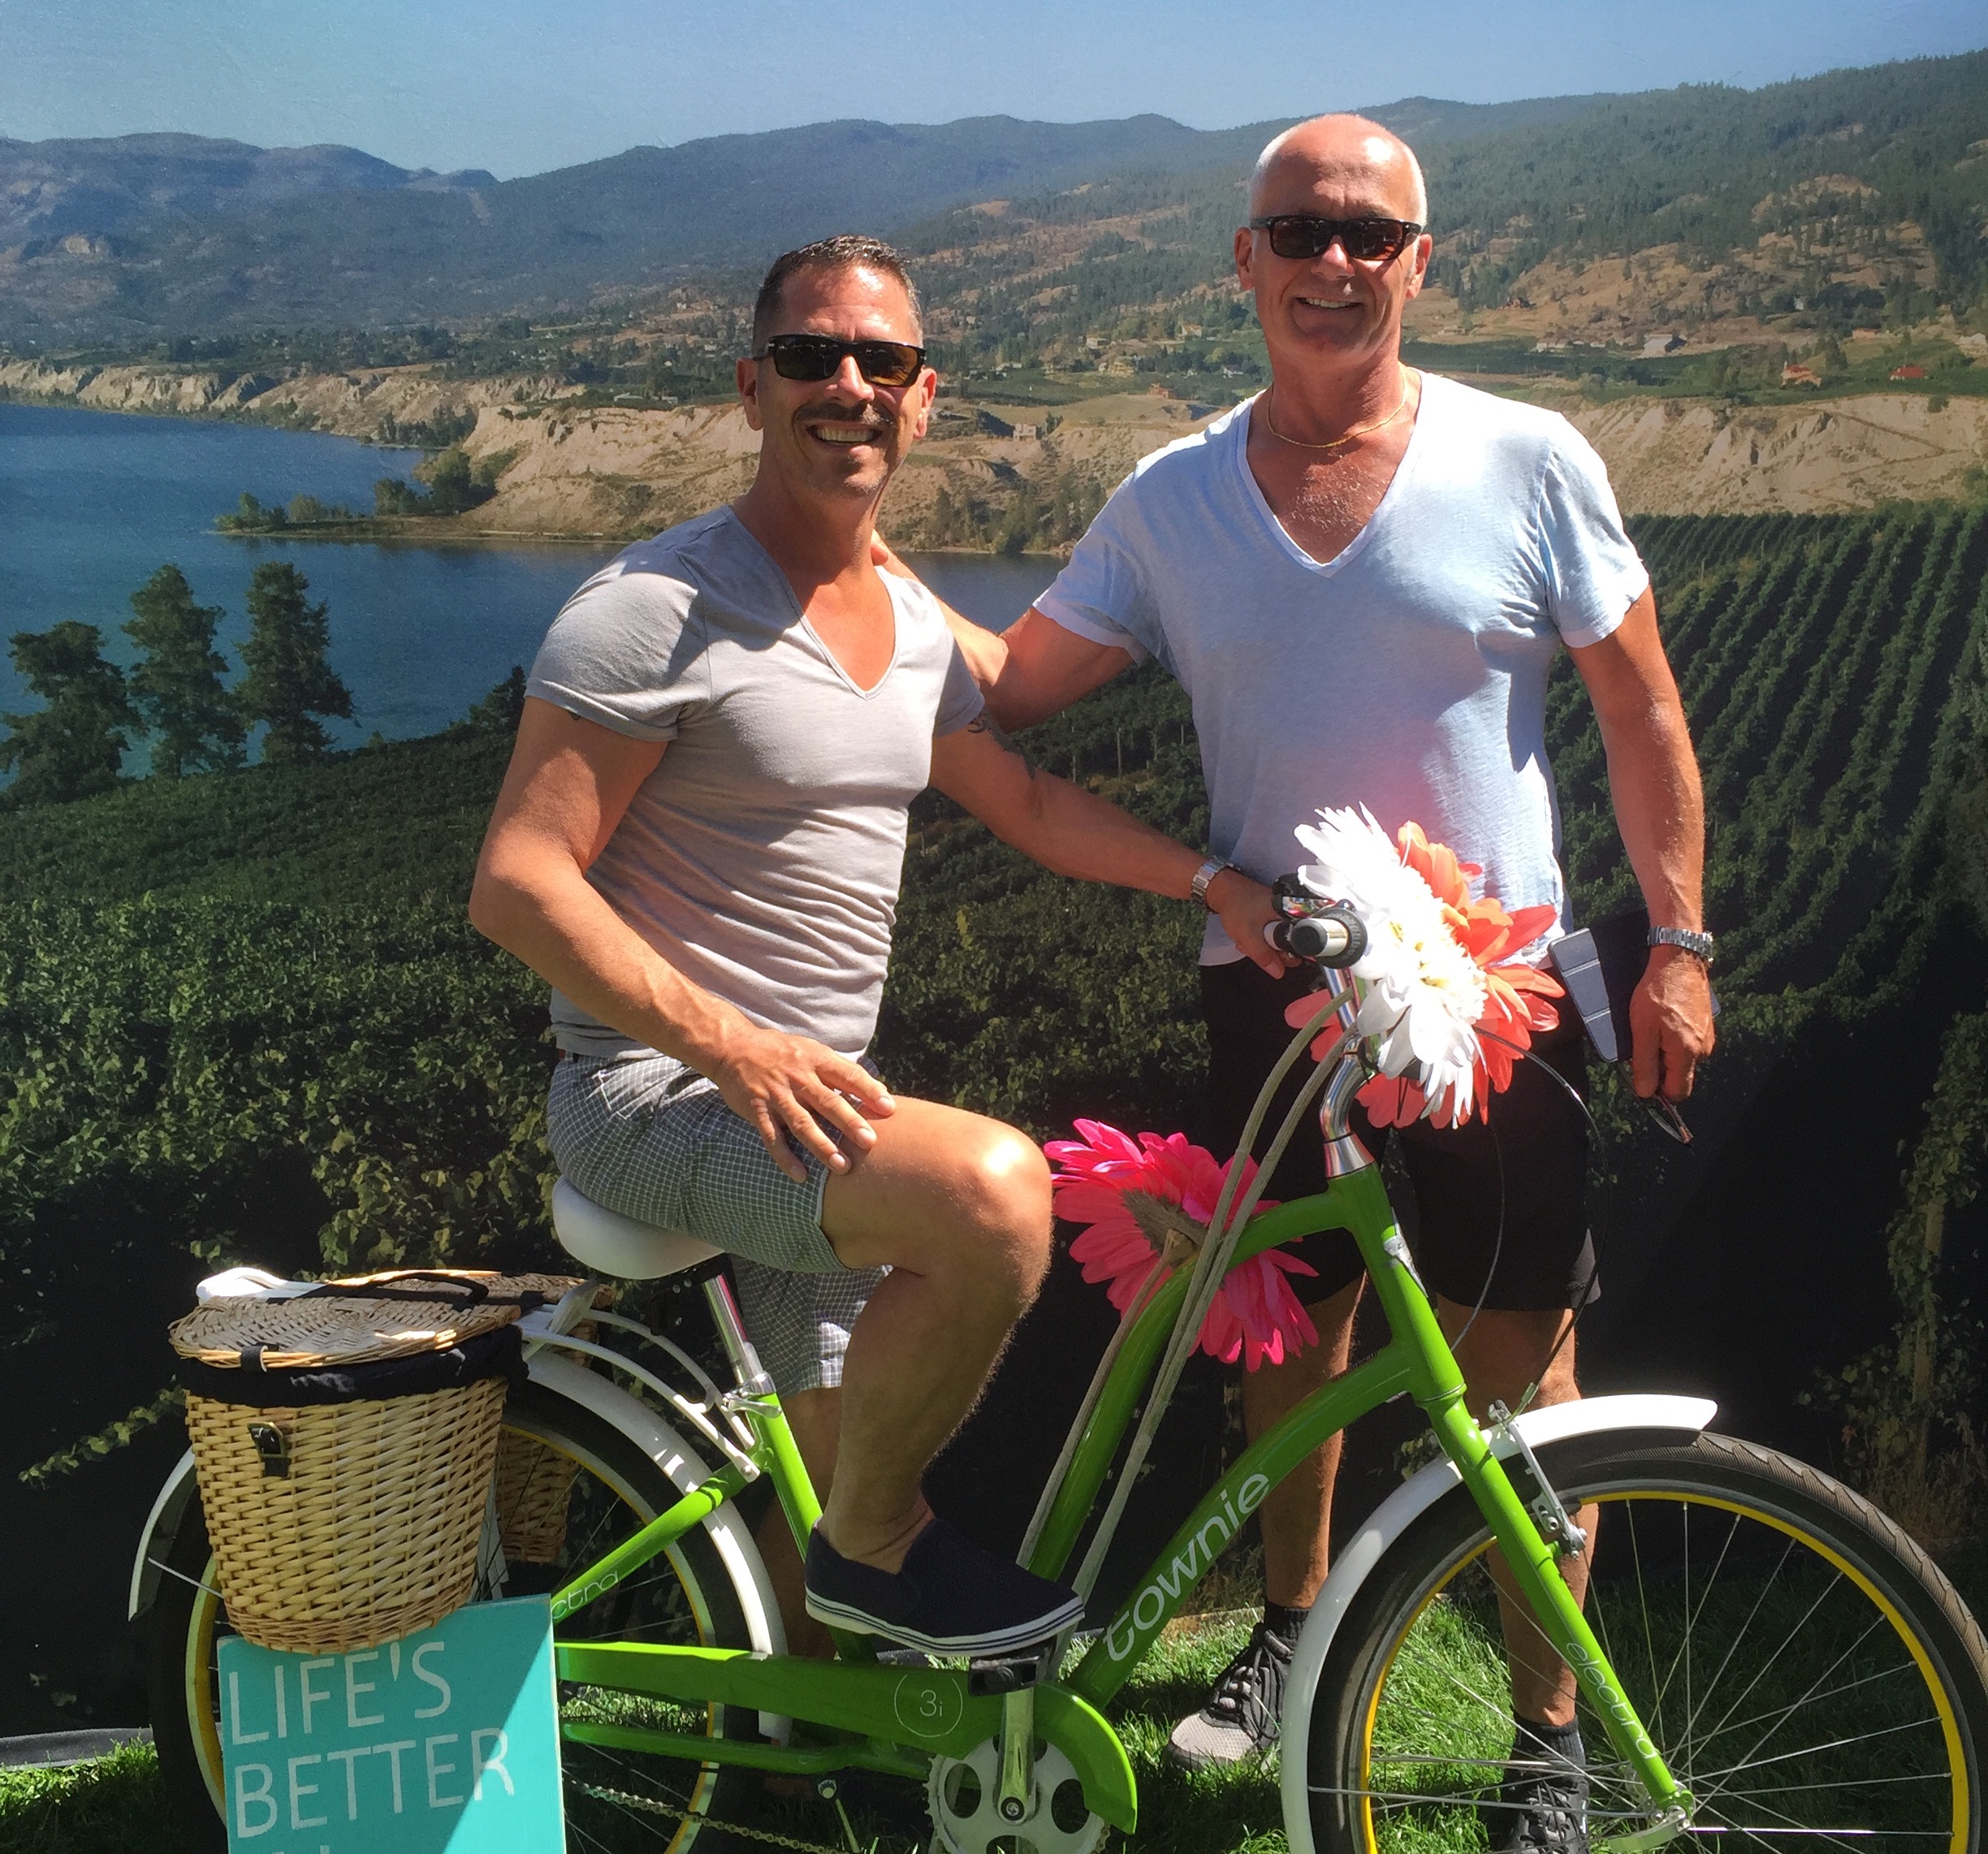 Two men in front of a vineyard and lake, one is sitting on a green bicycle covered in flowers